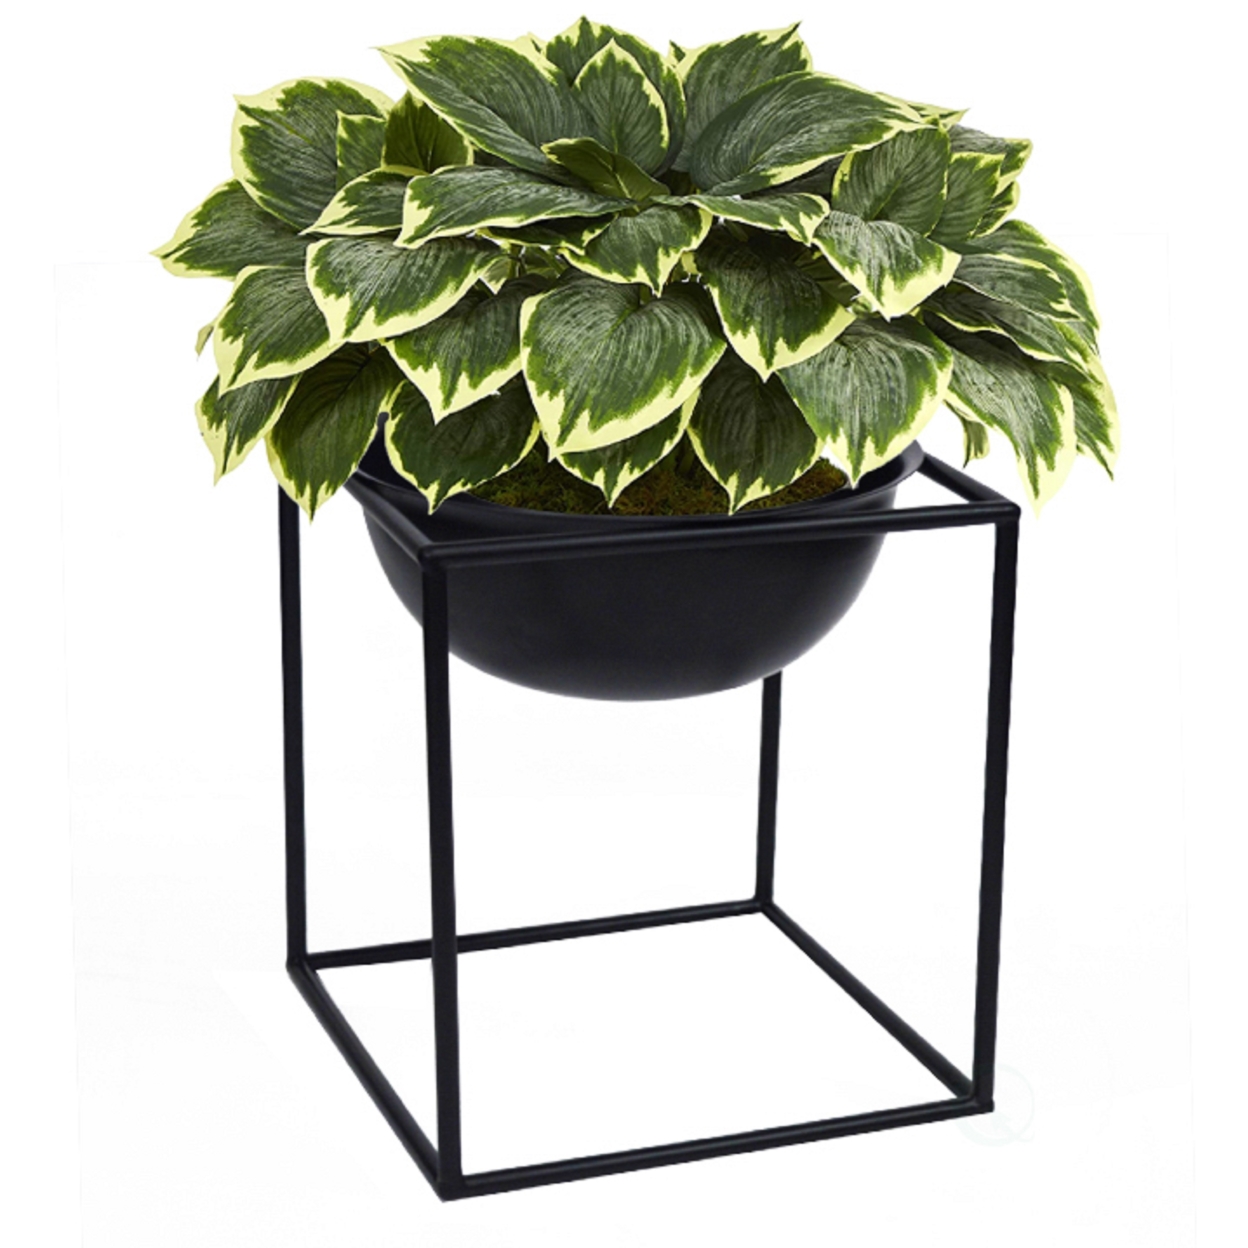 Tall Metal Floor Flower Planter Holder With Stand, Modern Decorative Floor Flower Holder, Perfect For Your Entryway, Living Room - Black